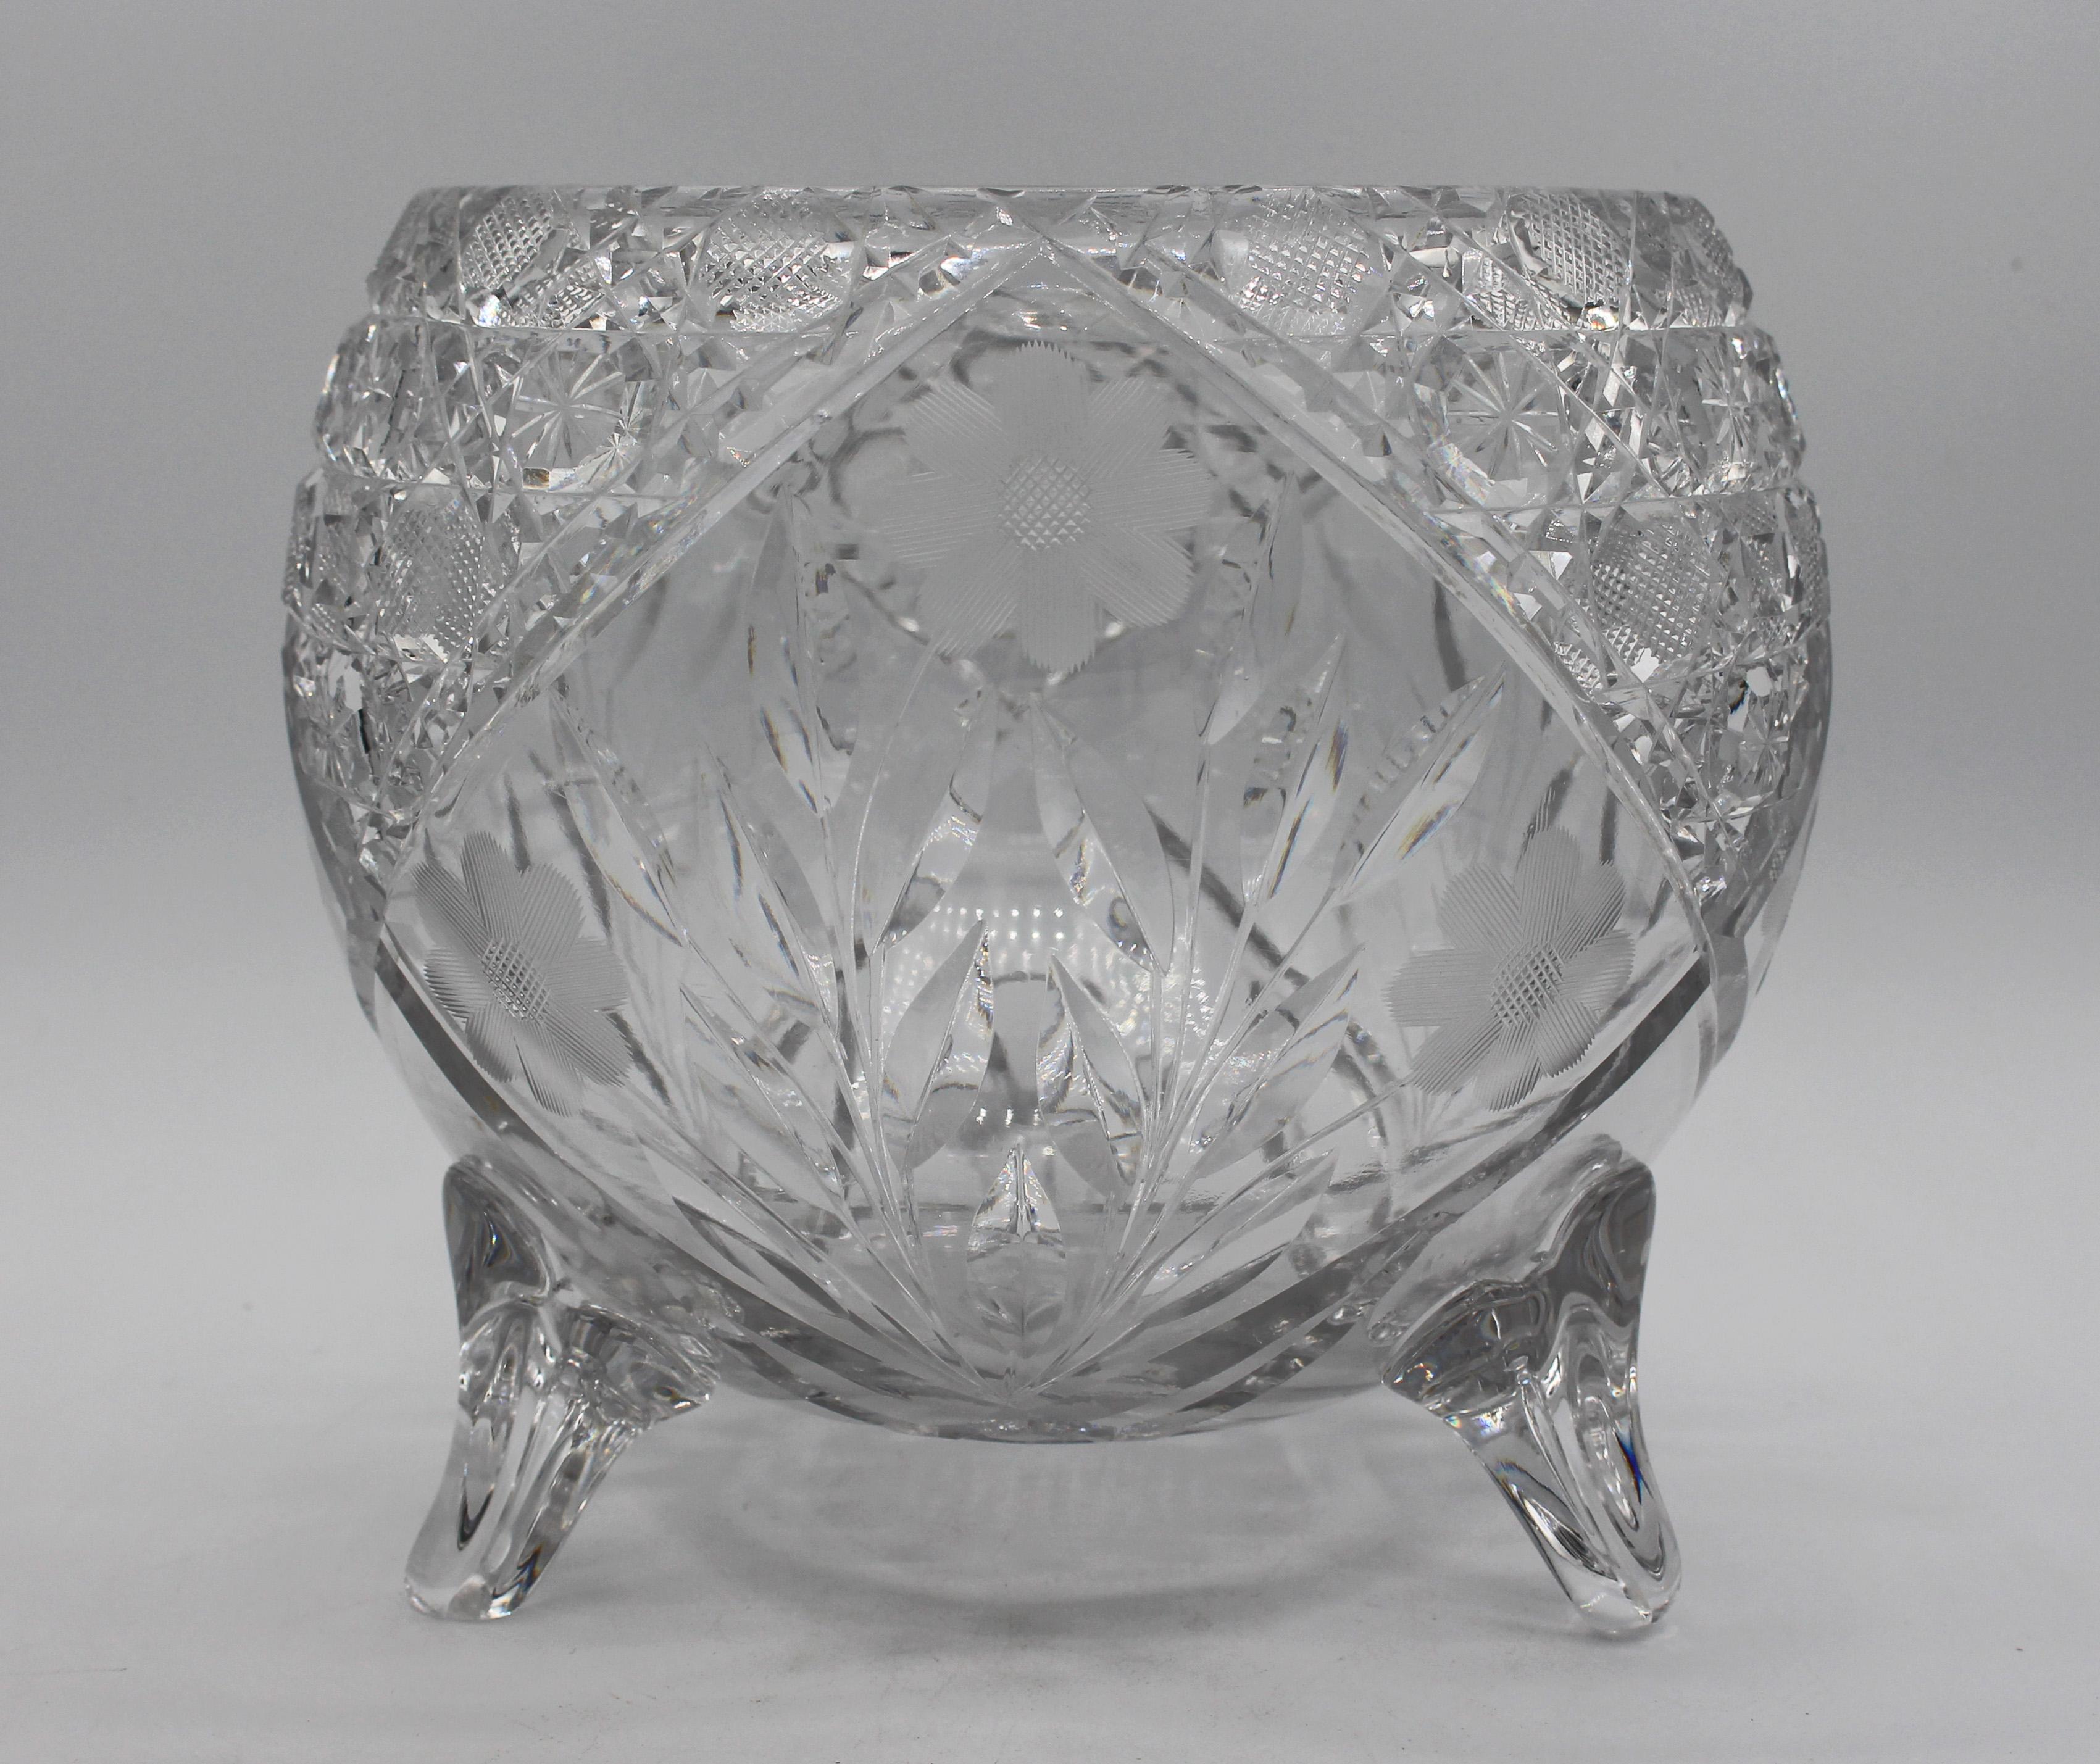 circa 1900 American brilliant cut glass footed rose bowl or toddy bowl. Unusually large for a stunning bouquet or as a toddy bowl. A few minute flaws. 7 1/2